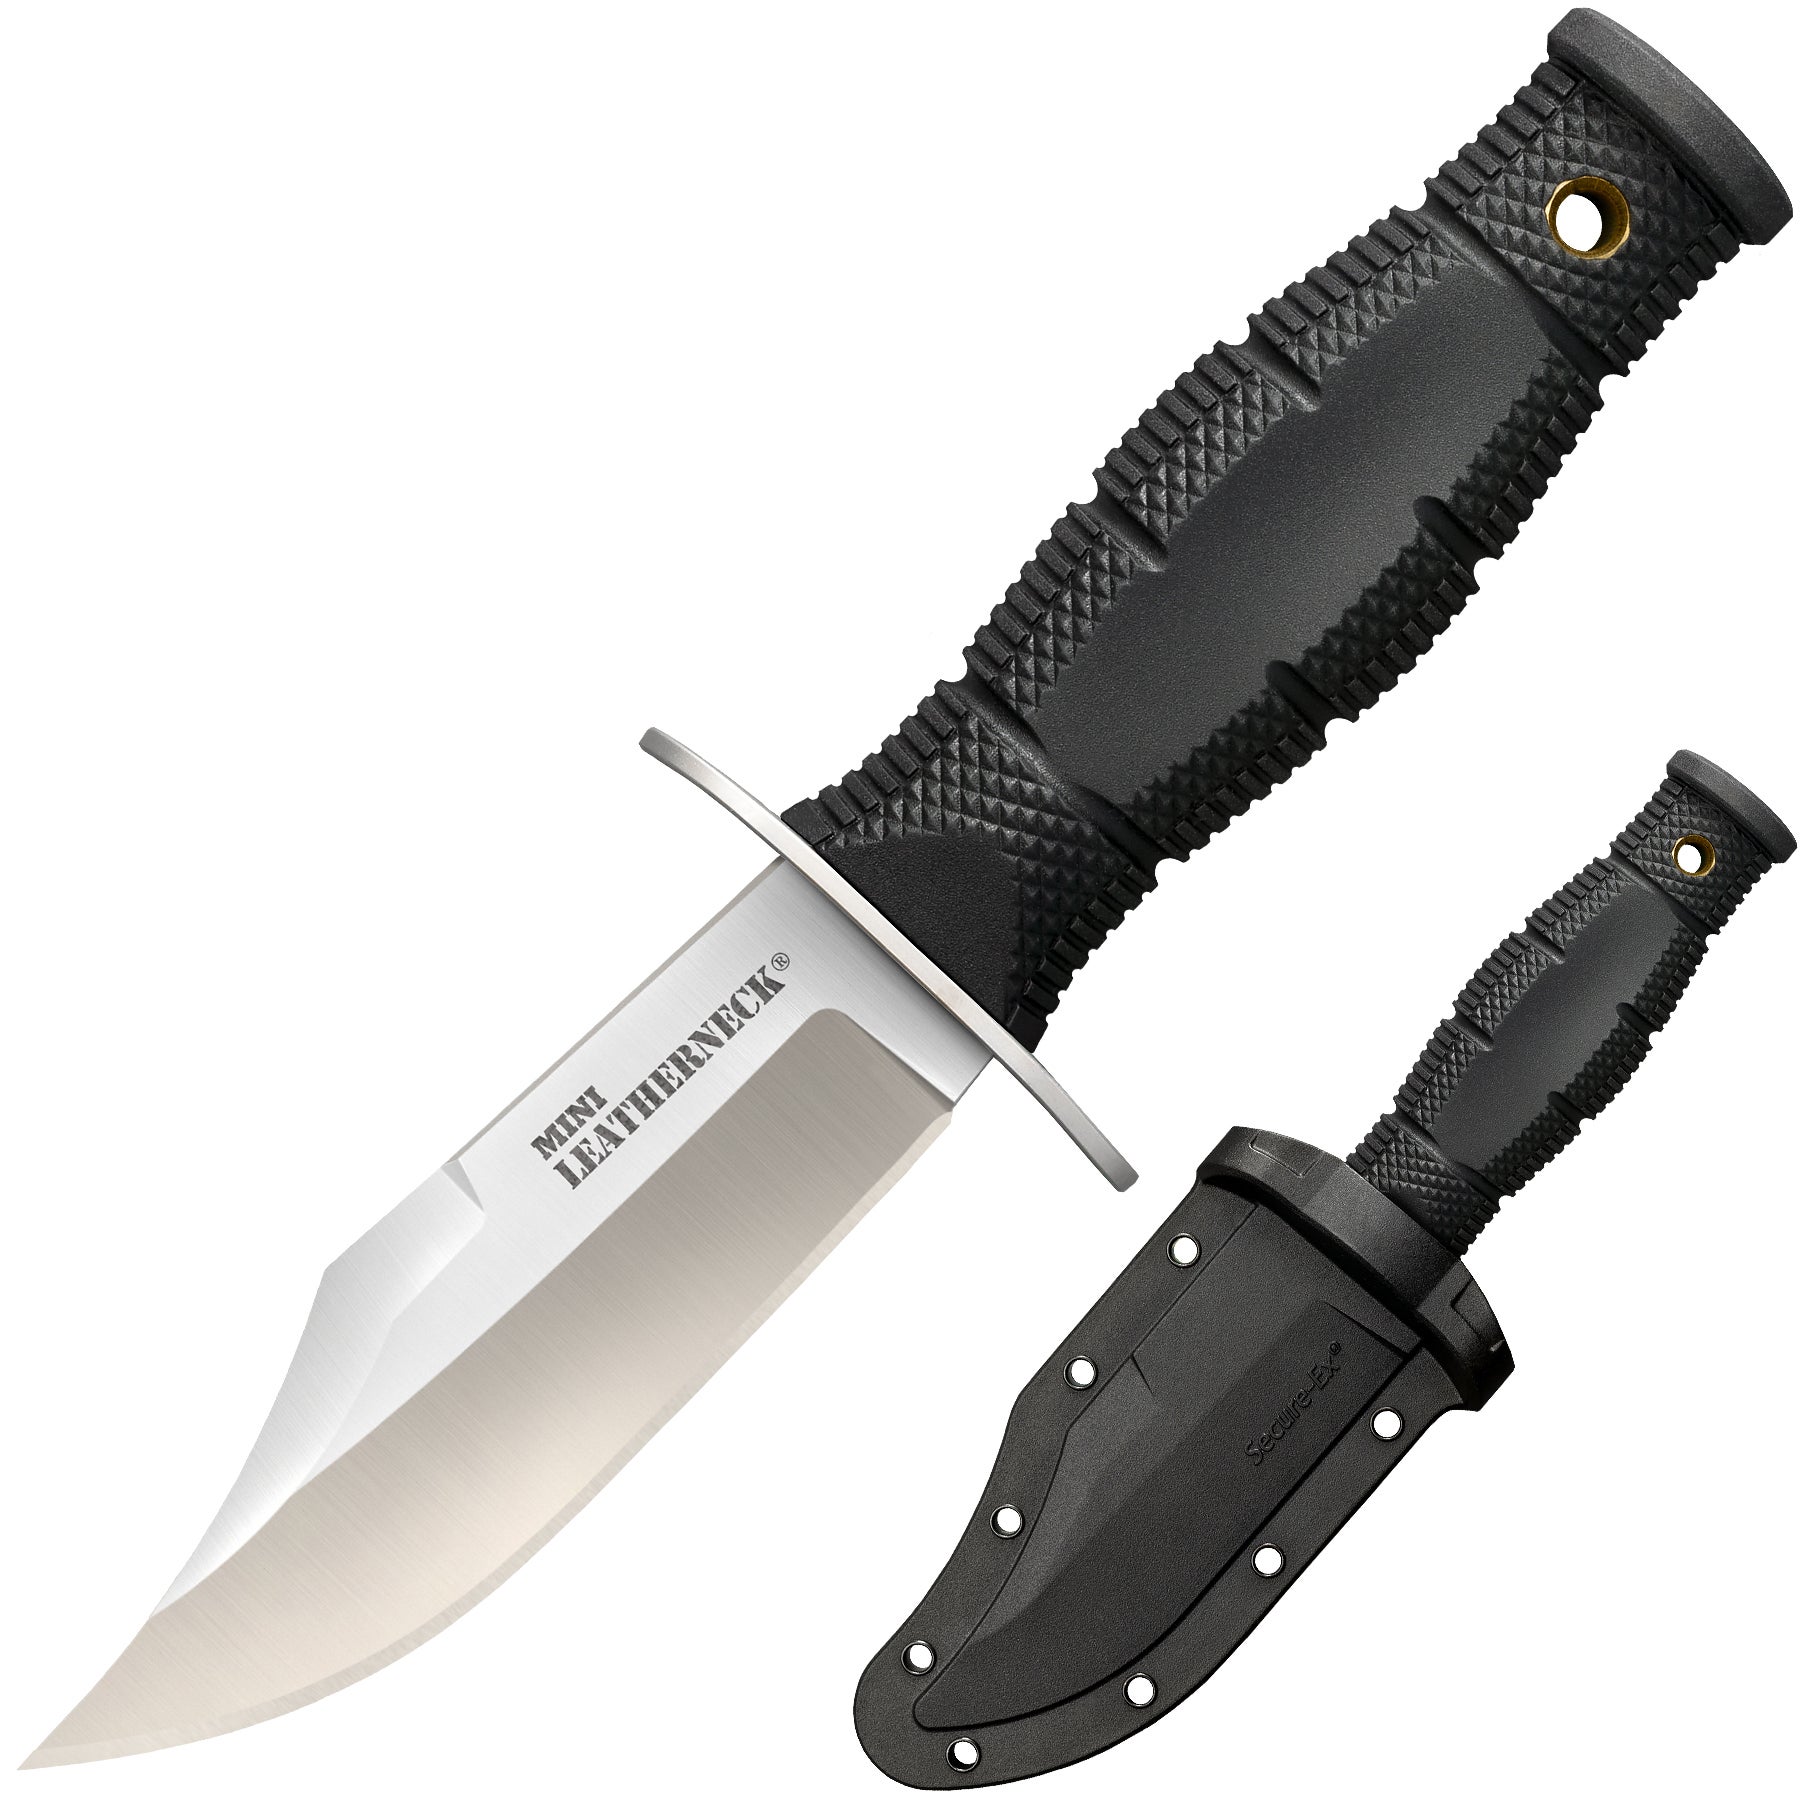 New Mini Leatherneck Fixed Blade Edc Knives From Cold Steel Shooters